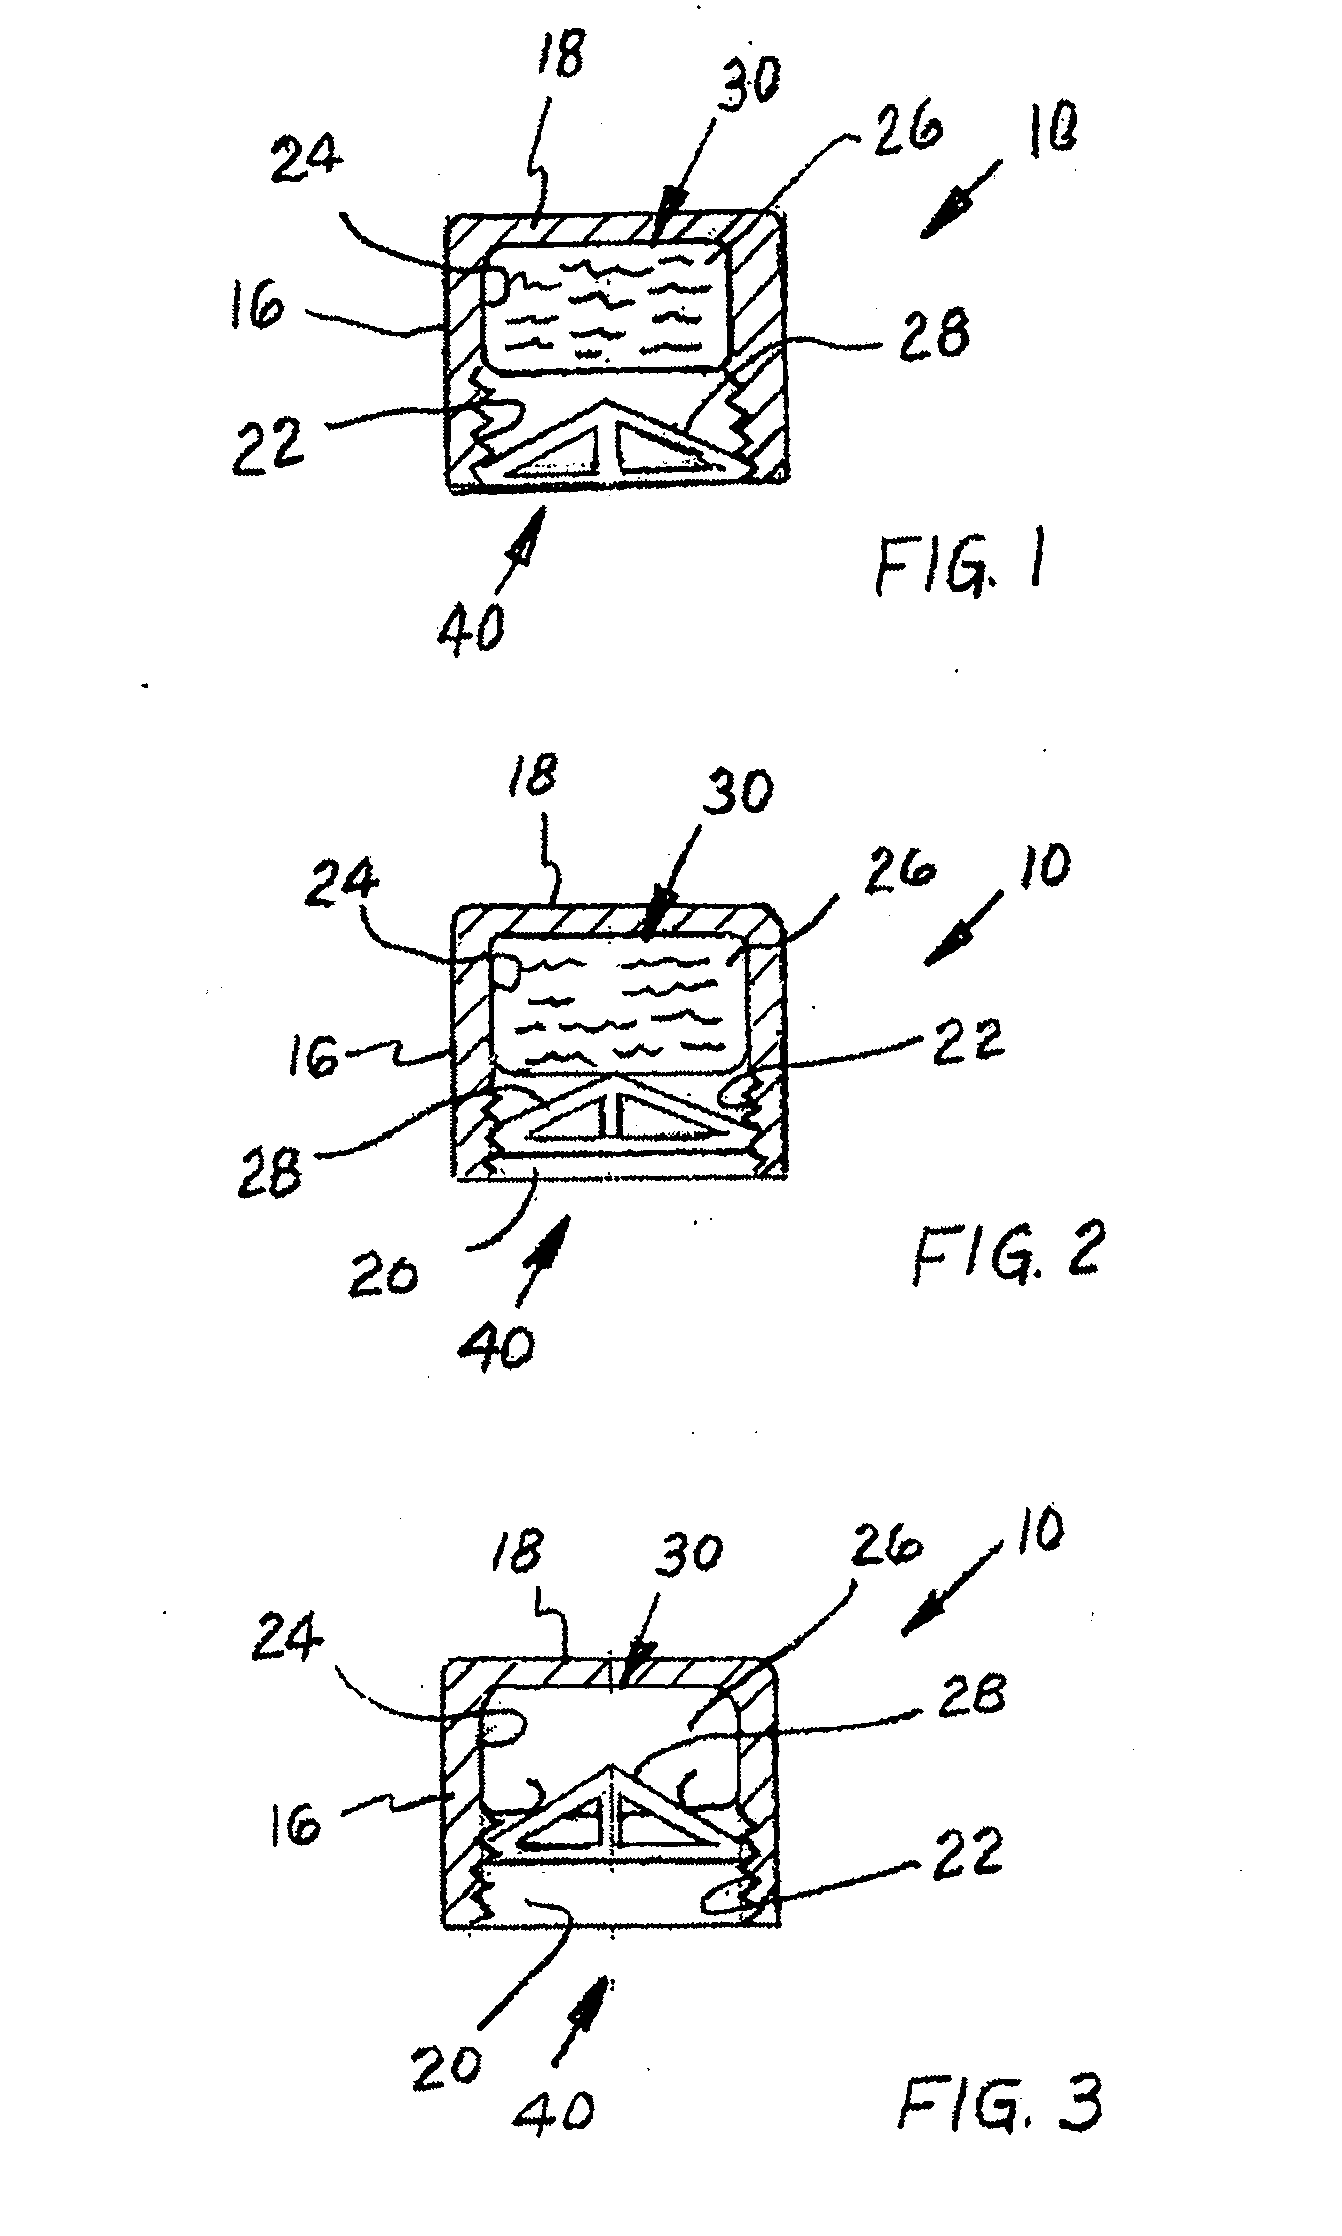 Universal closure apparatus with delivery system